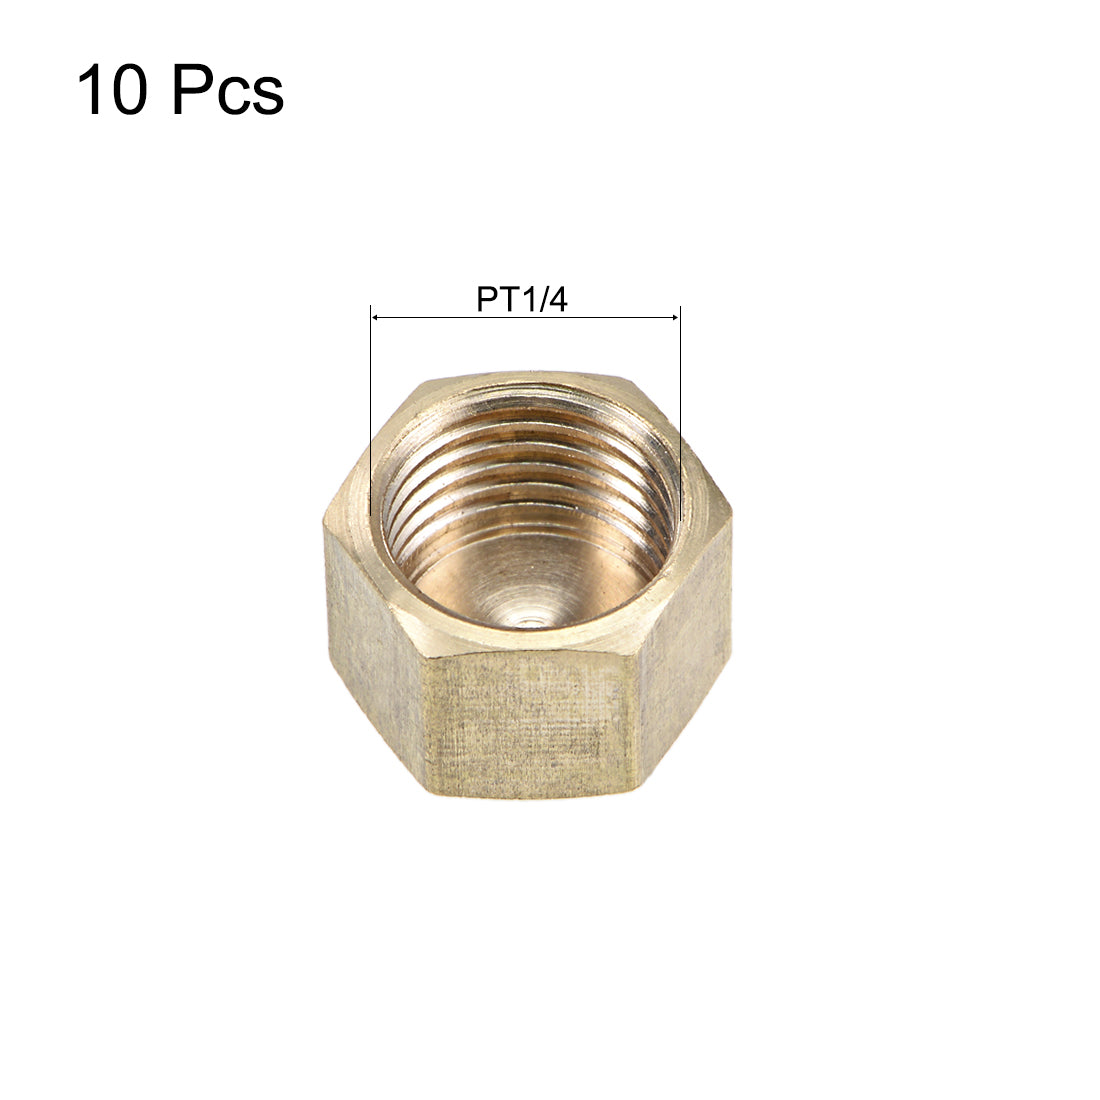 uxcell Uxcell 1/4-Inch Brass Cap 10pcs PT1/4 Female Pipe Fitting Hex Compression Stop Valve Connector